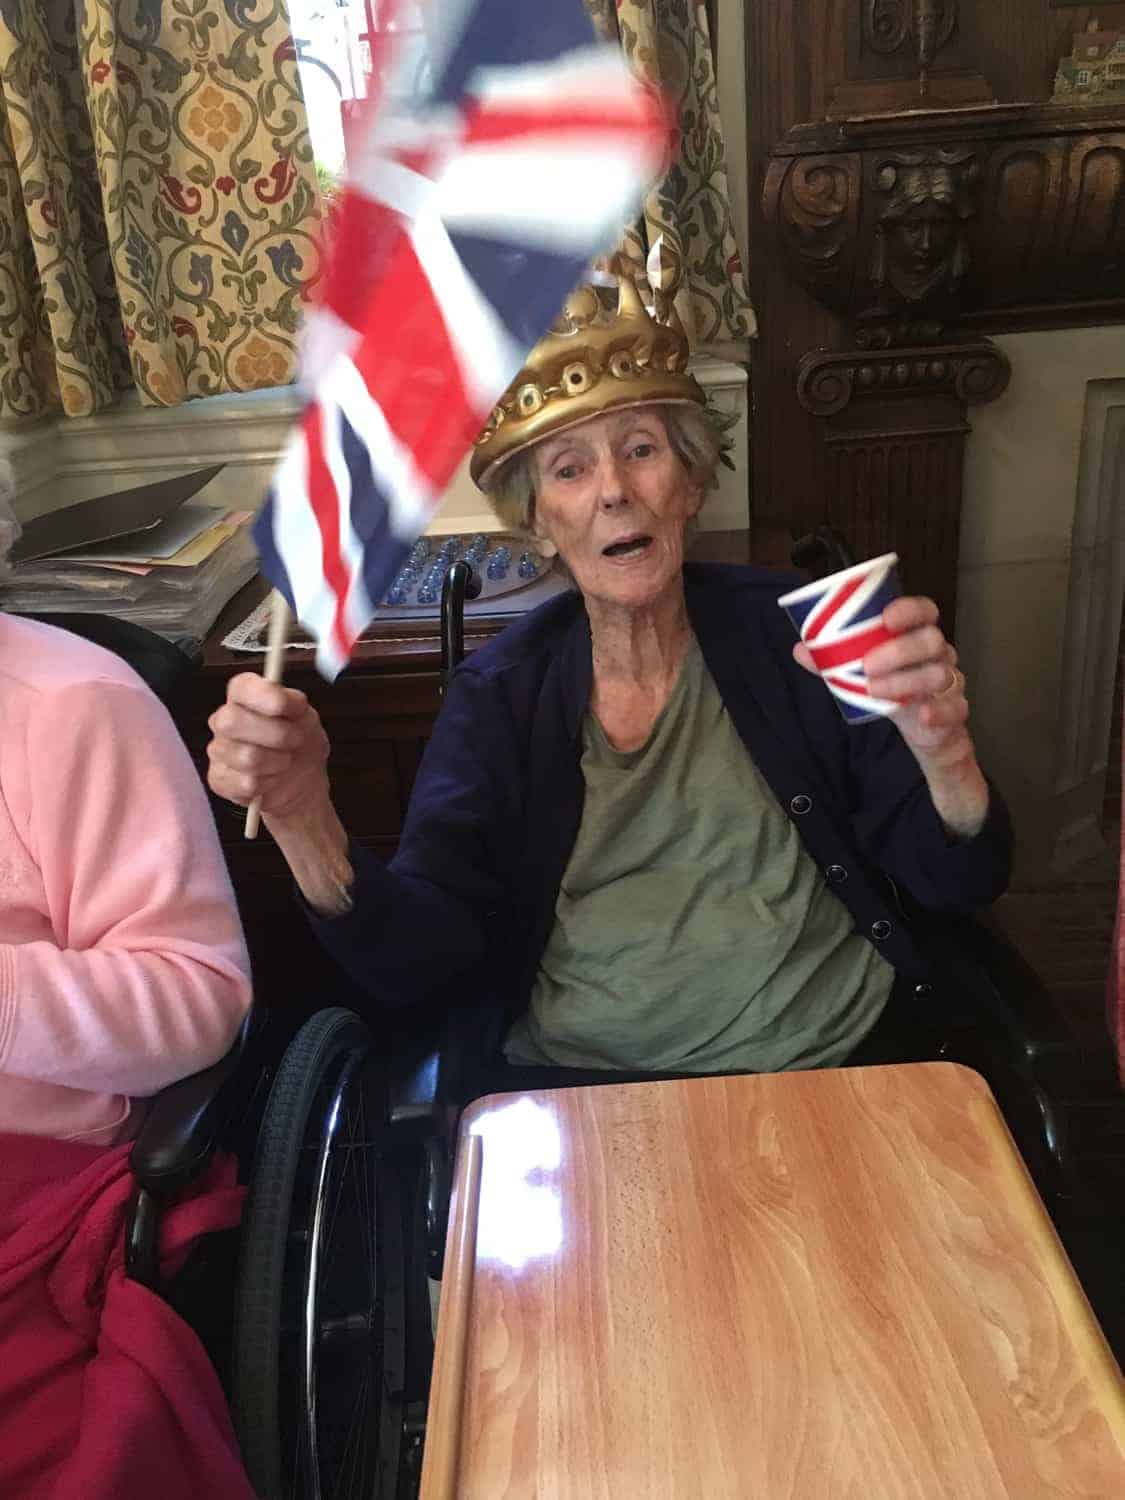 An elderly individual cheerfully waving a British flag, seated in a wheelchair in a gallery, with a joyous expression and perhaps celebrating a national event or showing patriotic spirit.